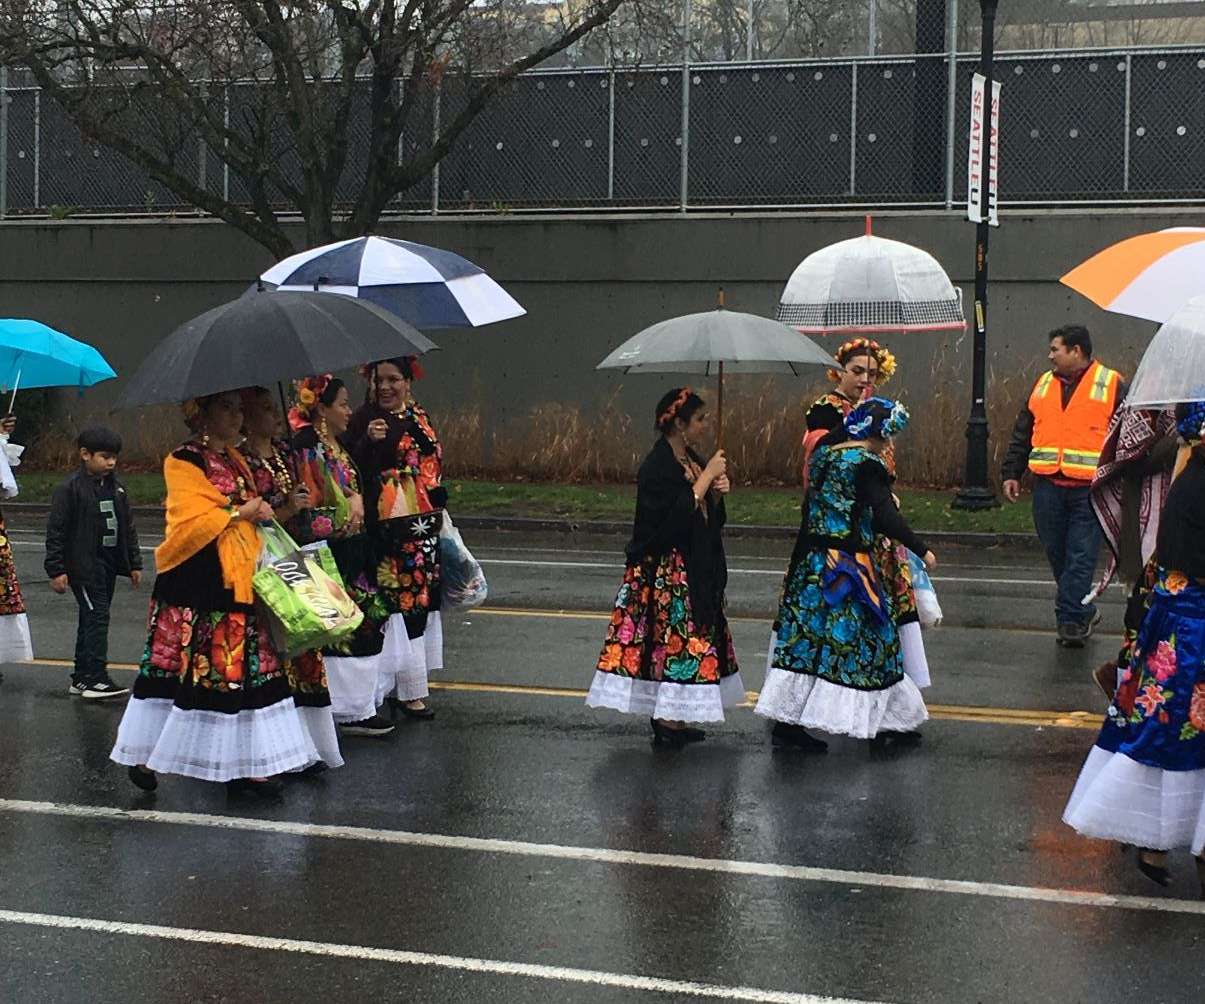 Procession on 12th Ave near Seattle University 2019